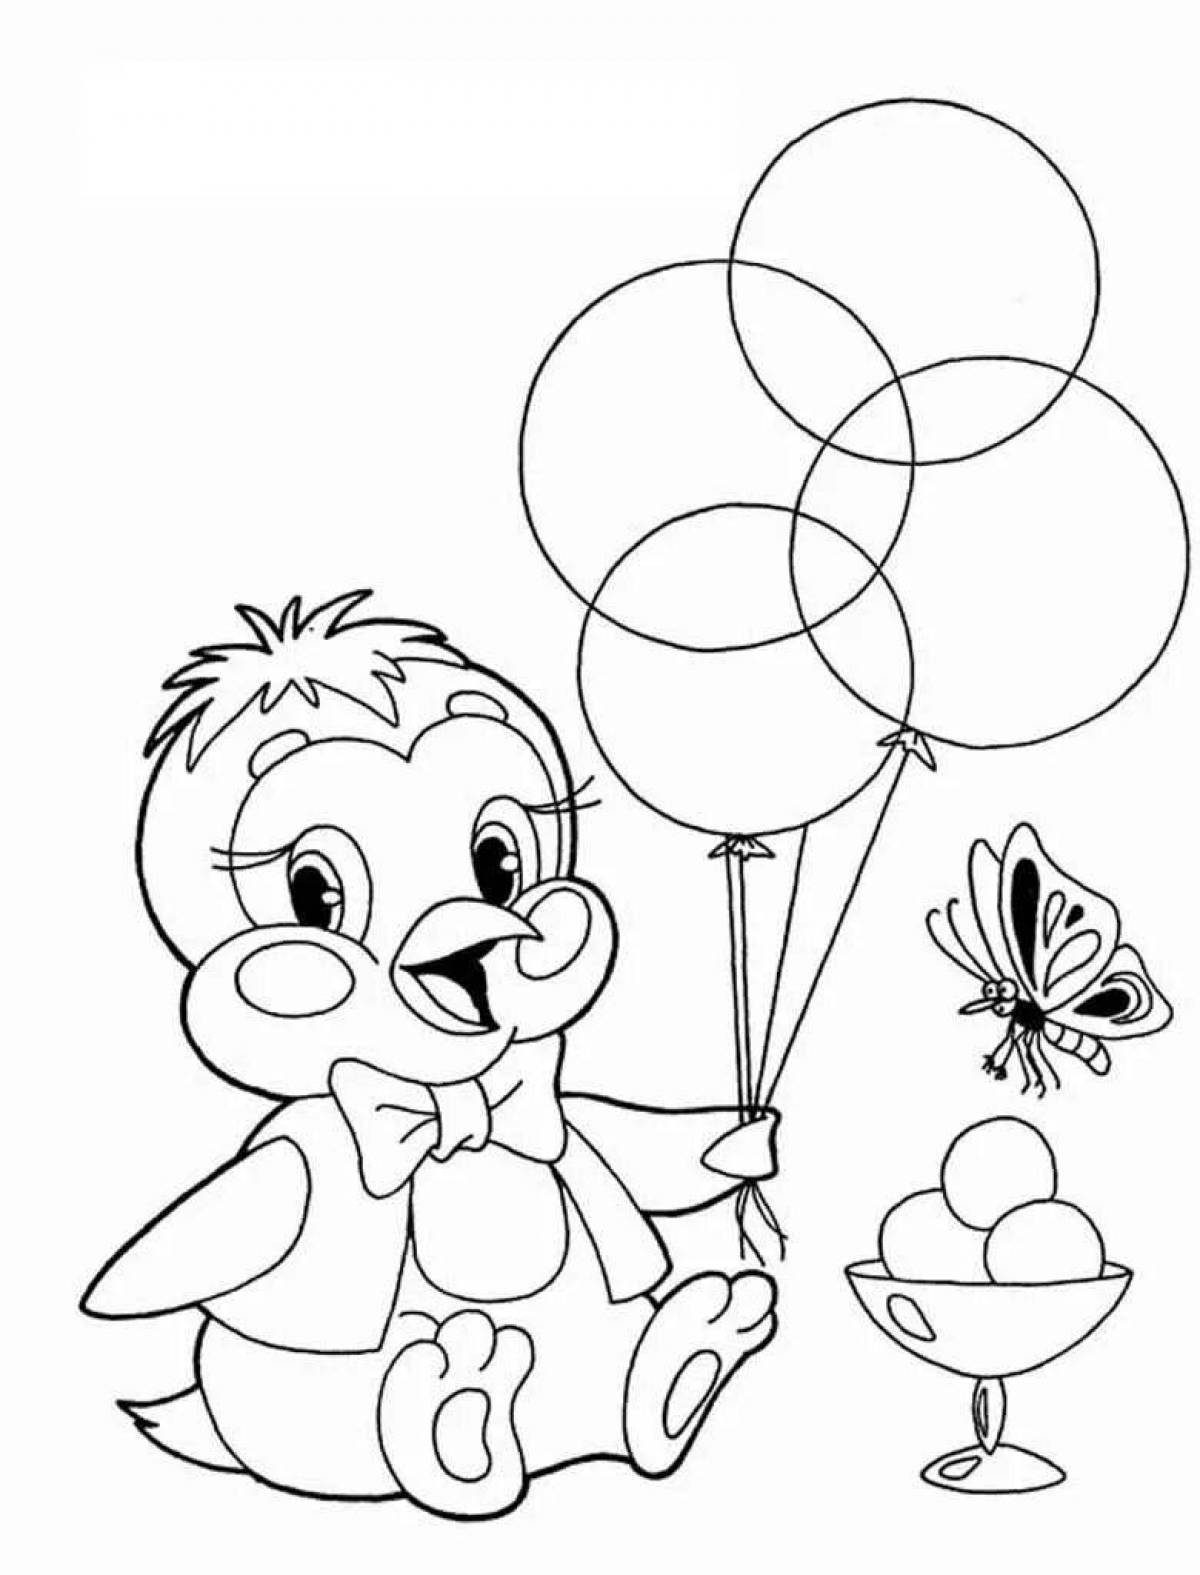 Outstanding coloring book for 4-5 year olds